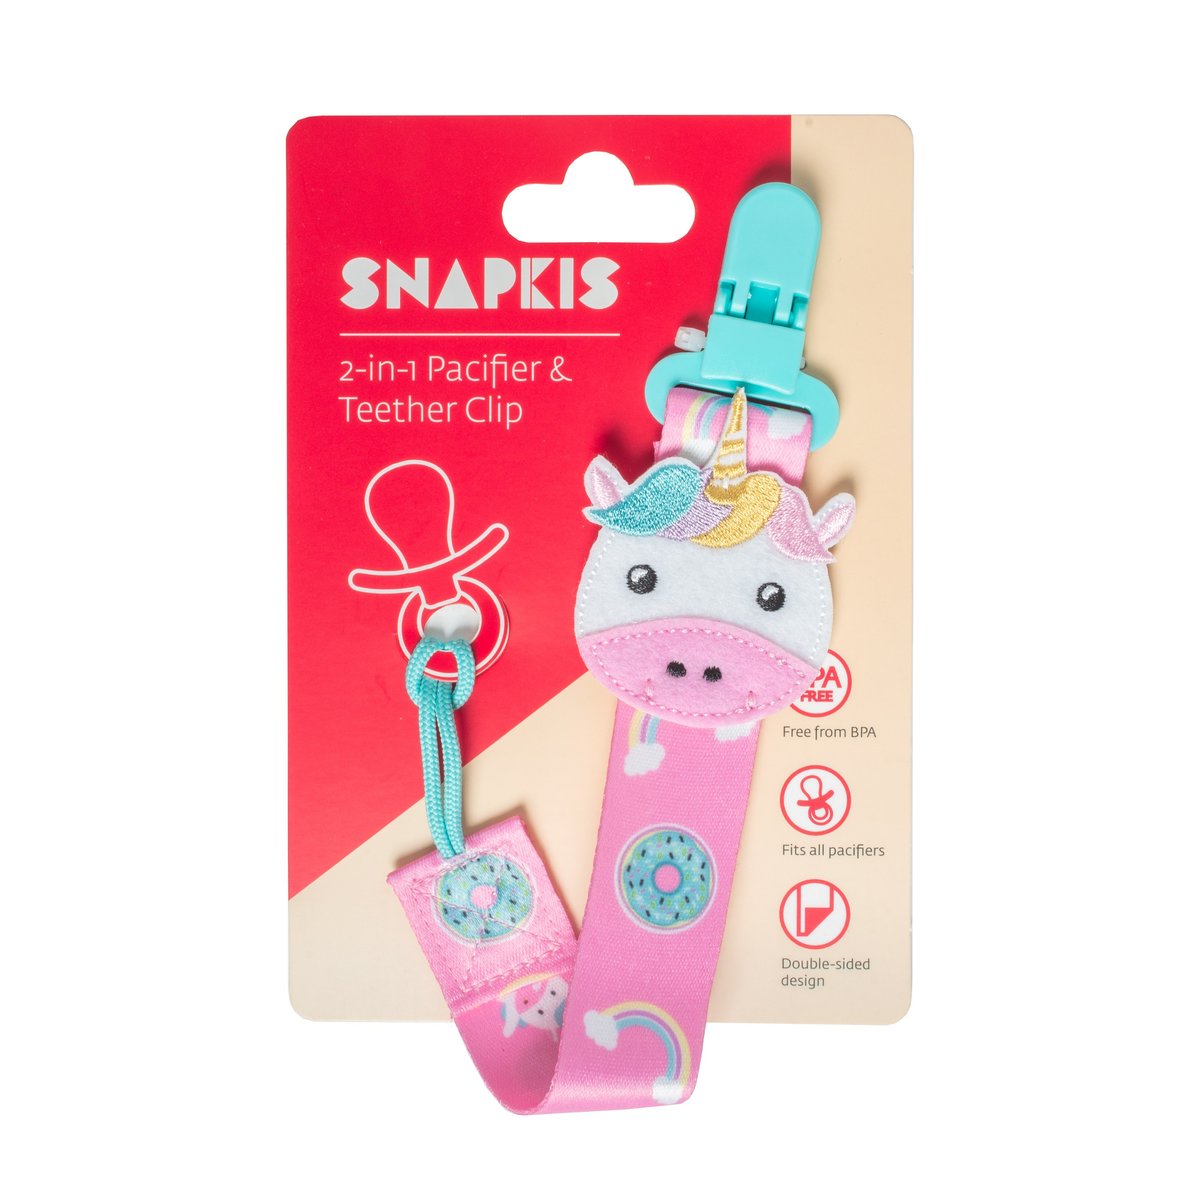 2-IN-1 PACIFIER & TEETHER CLIP UNICORN